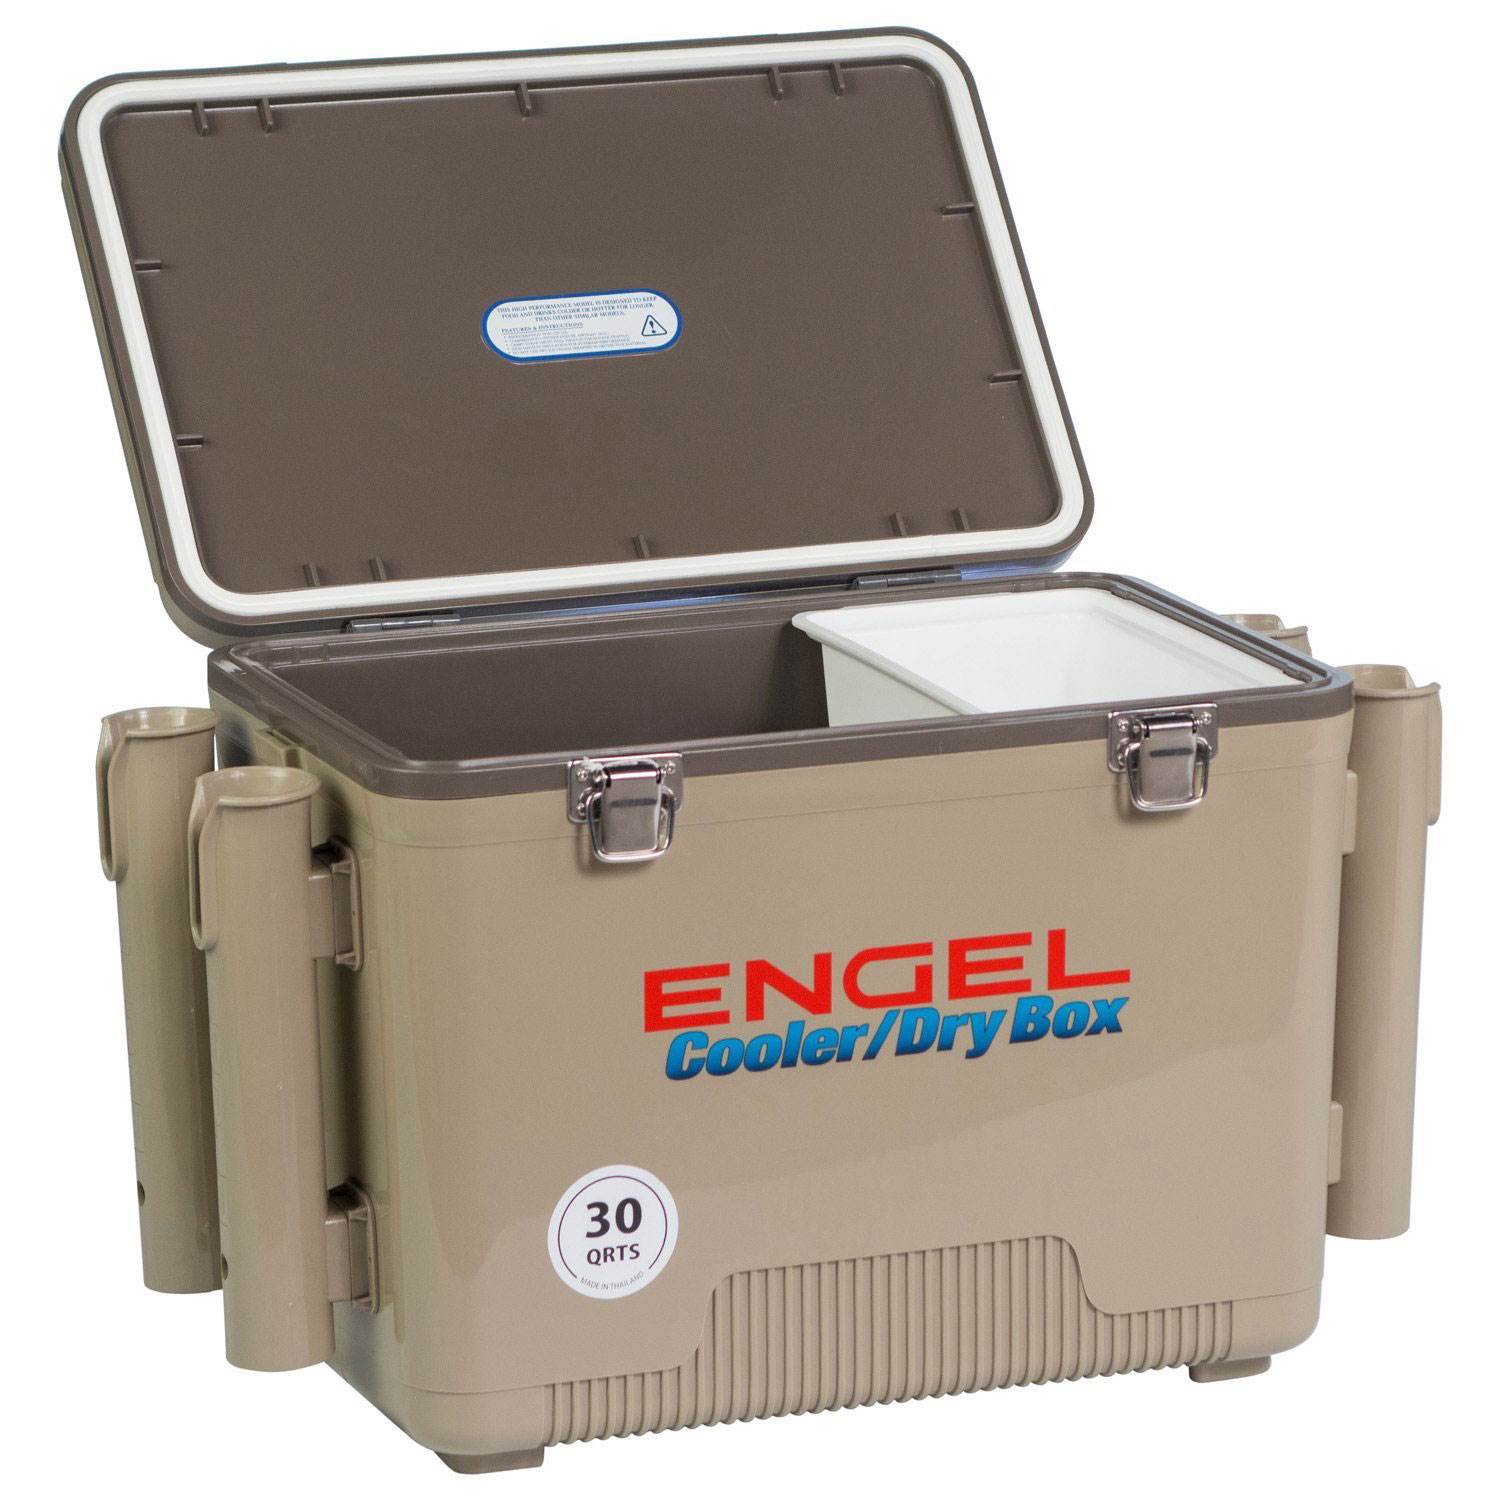 engel cooler with rod holders